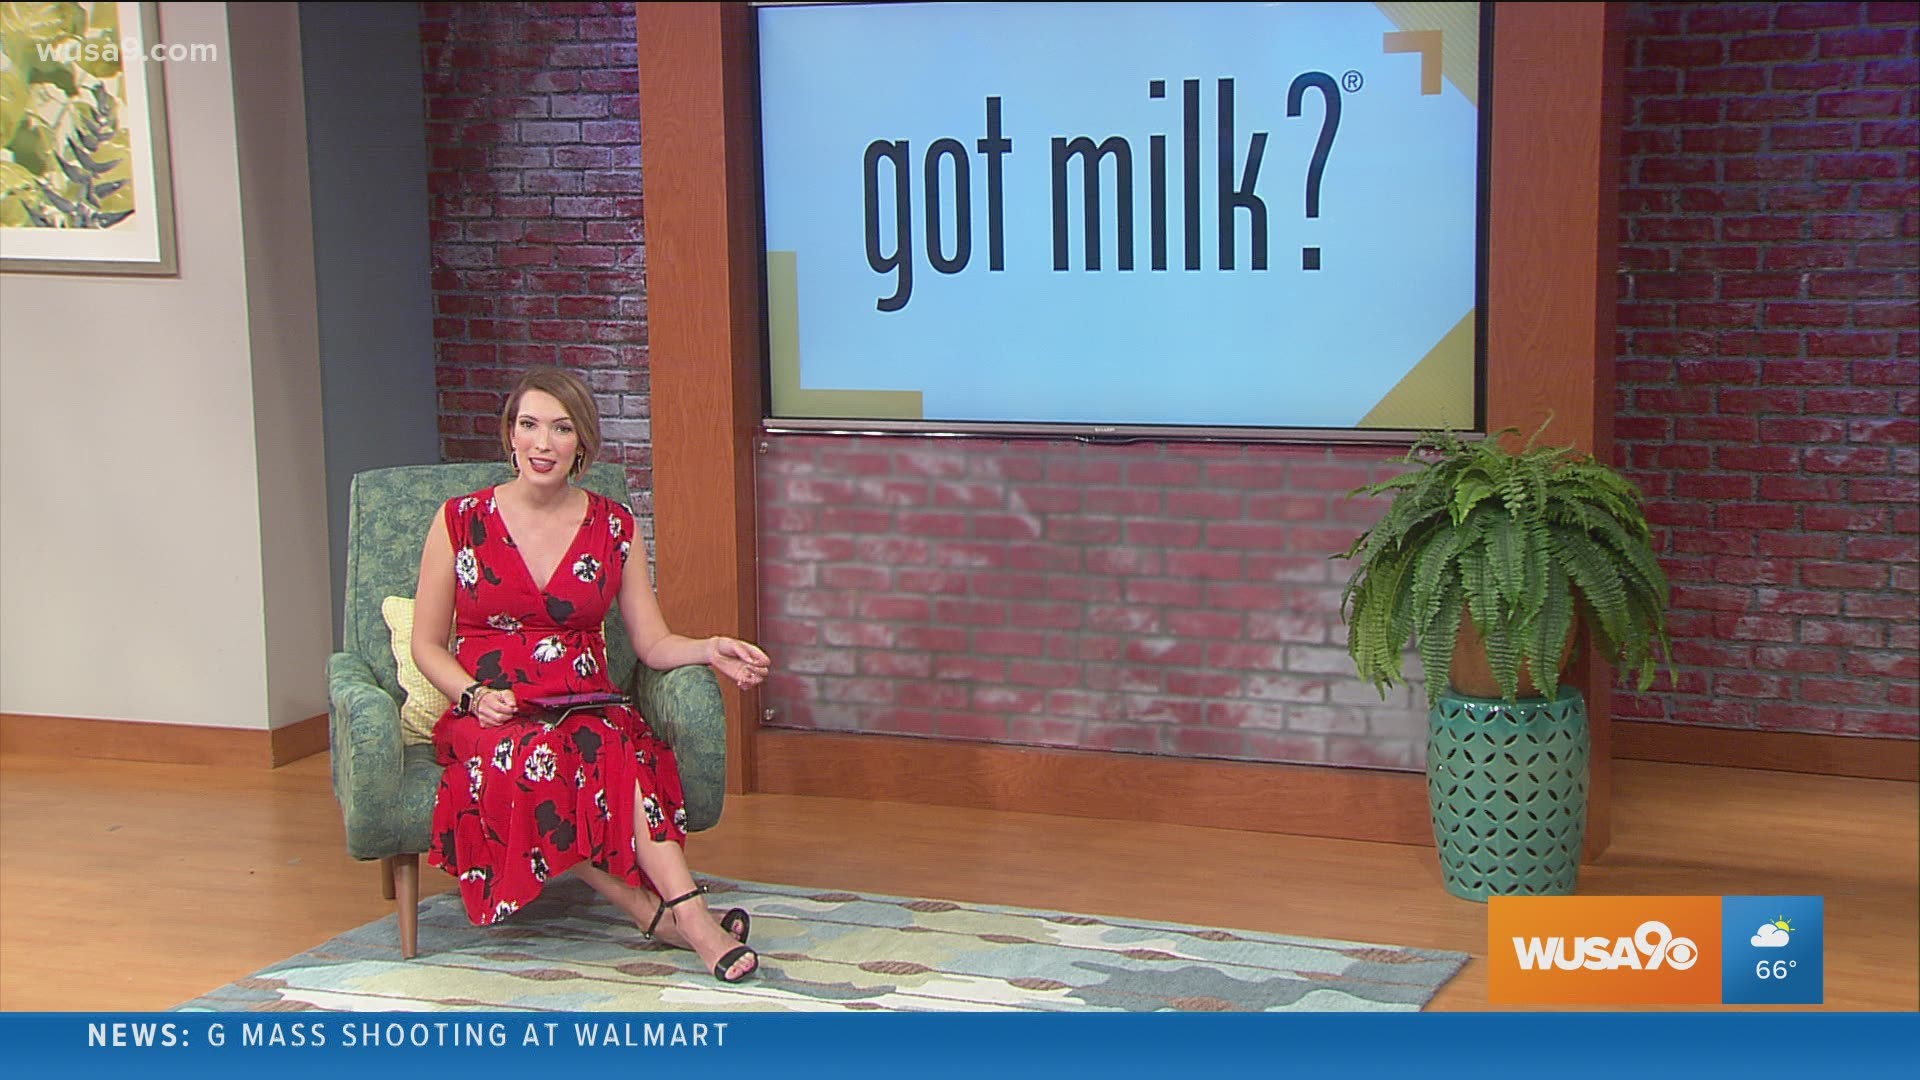 Sponsored by American Dairy Association North East. Lachell Miller Gayle shares more about the beverage Olympians drink. Visit AmericanDairy.com